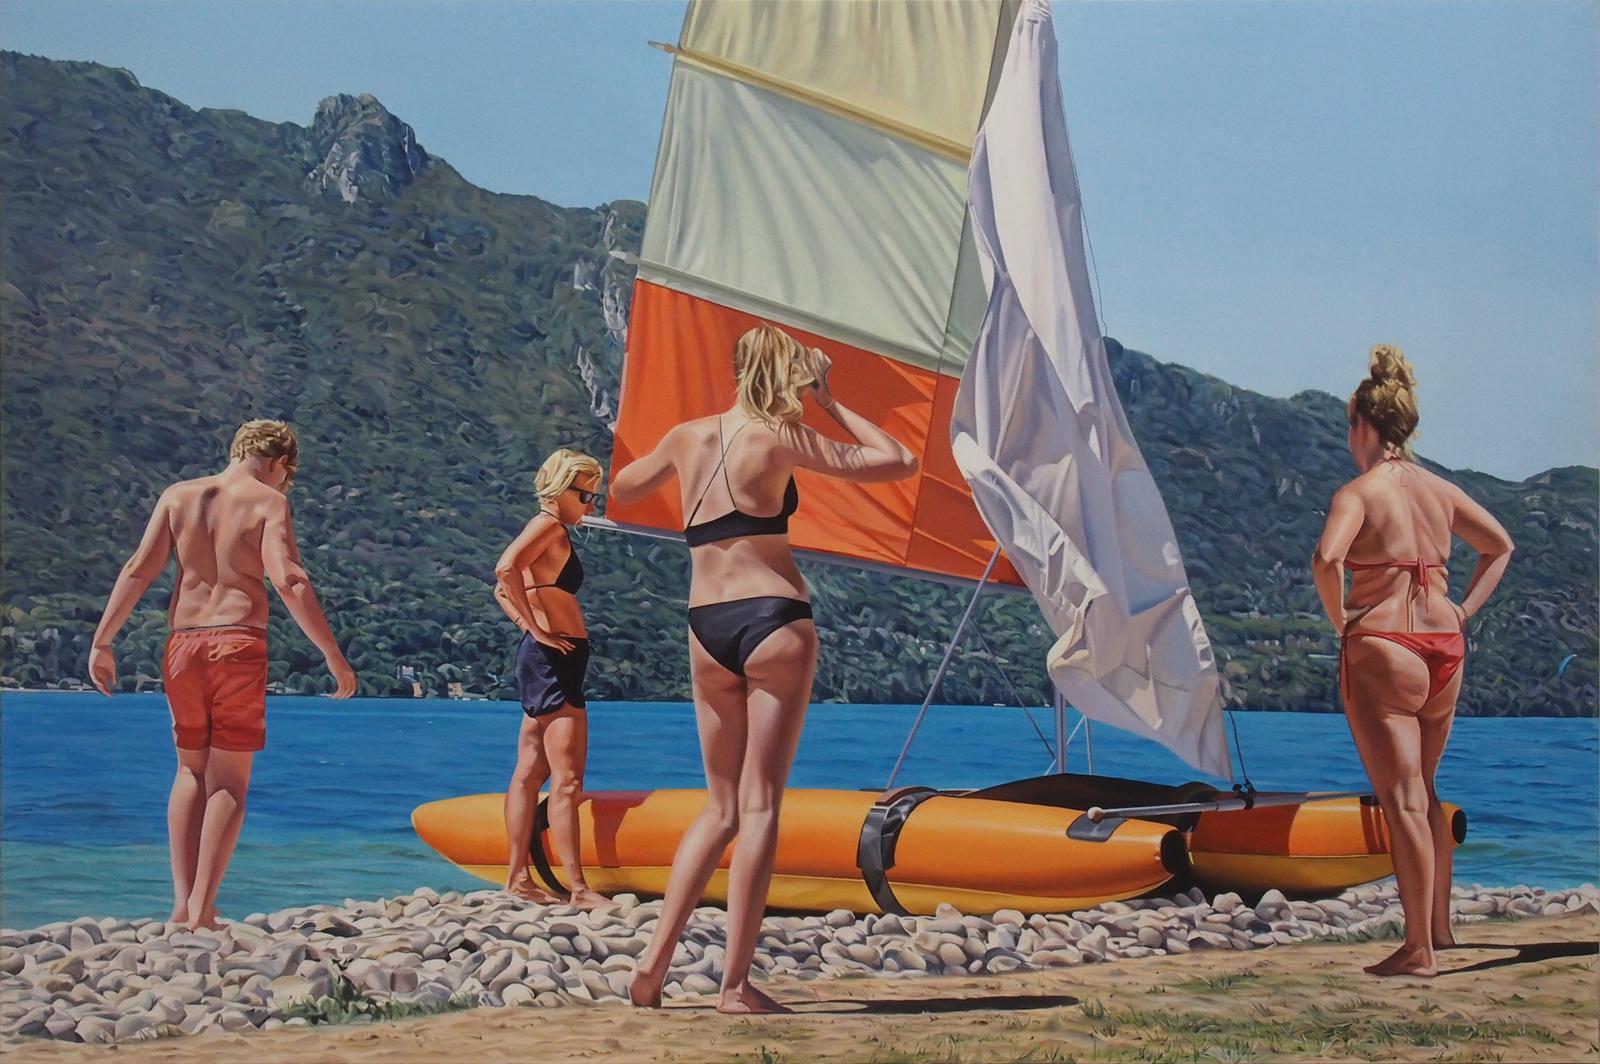 Signed at the back of the painting

Adrien Belgrand is a French artist born in 1982 who lives & works in Paris, France